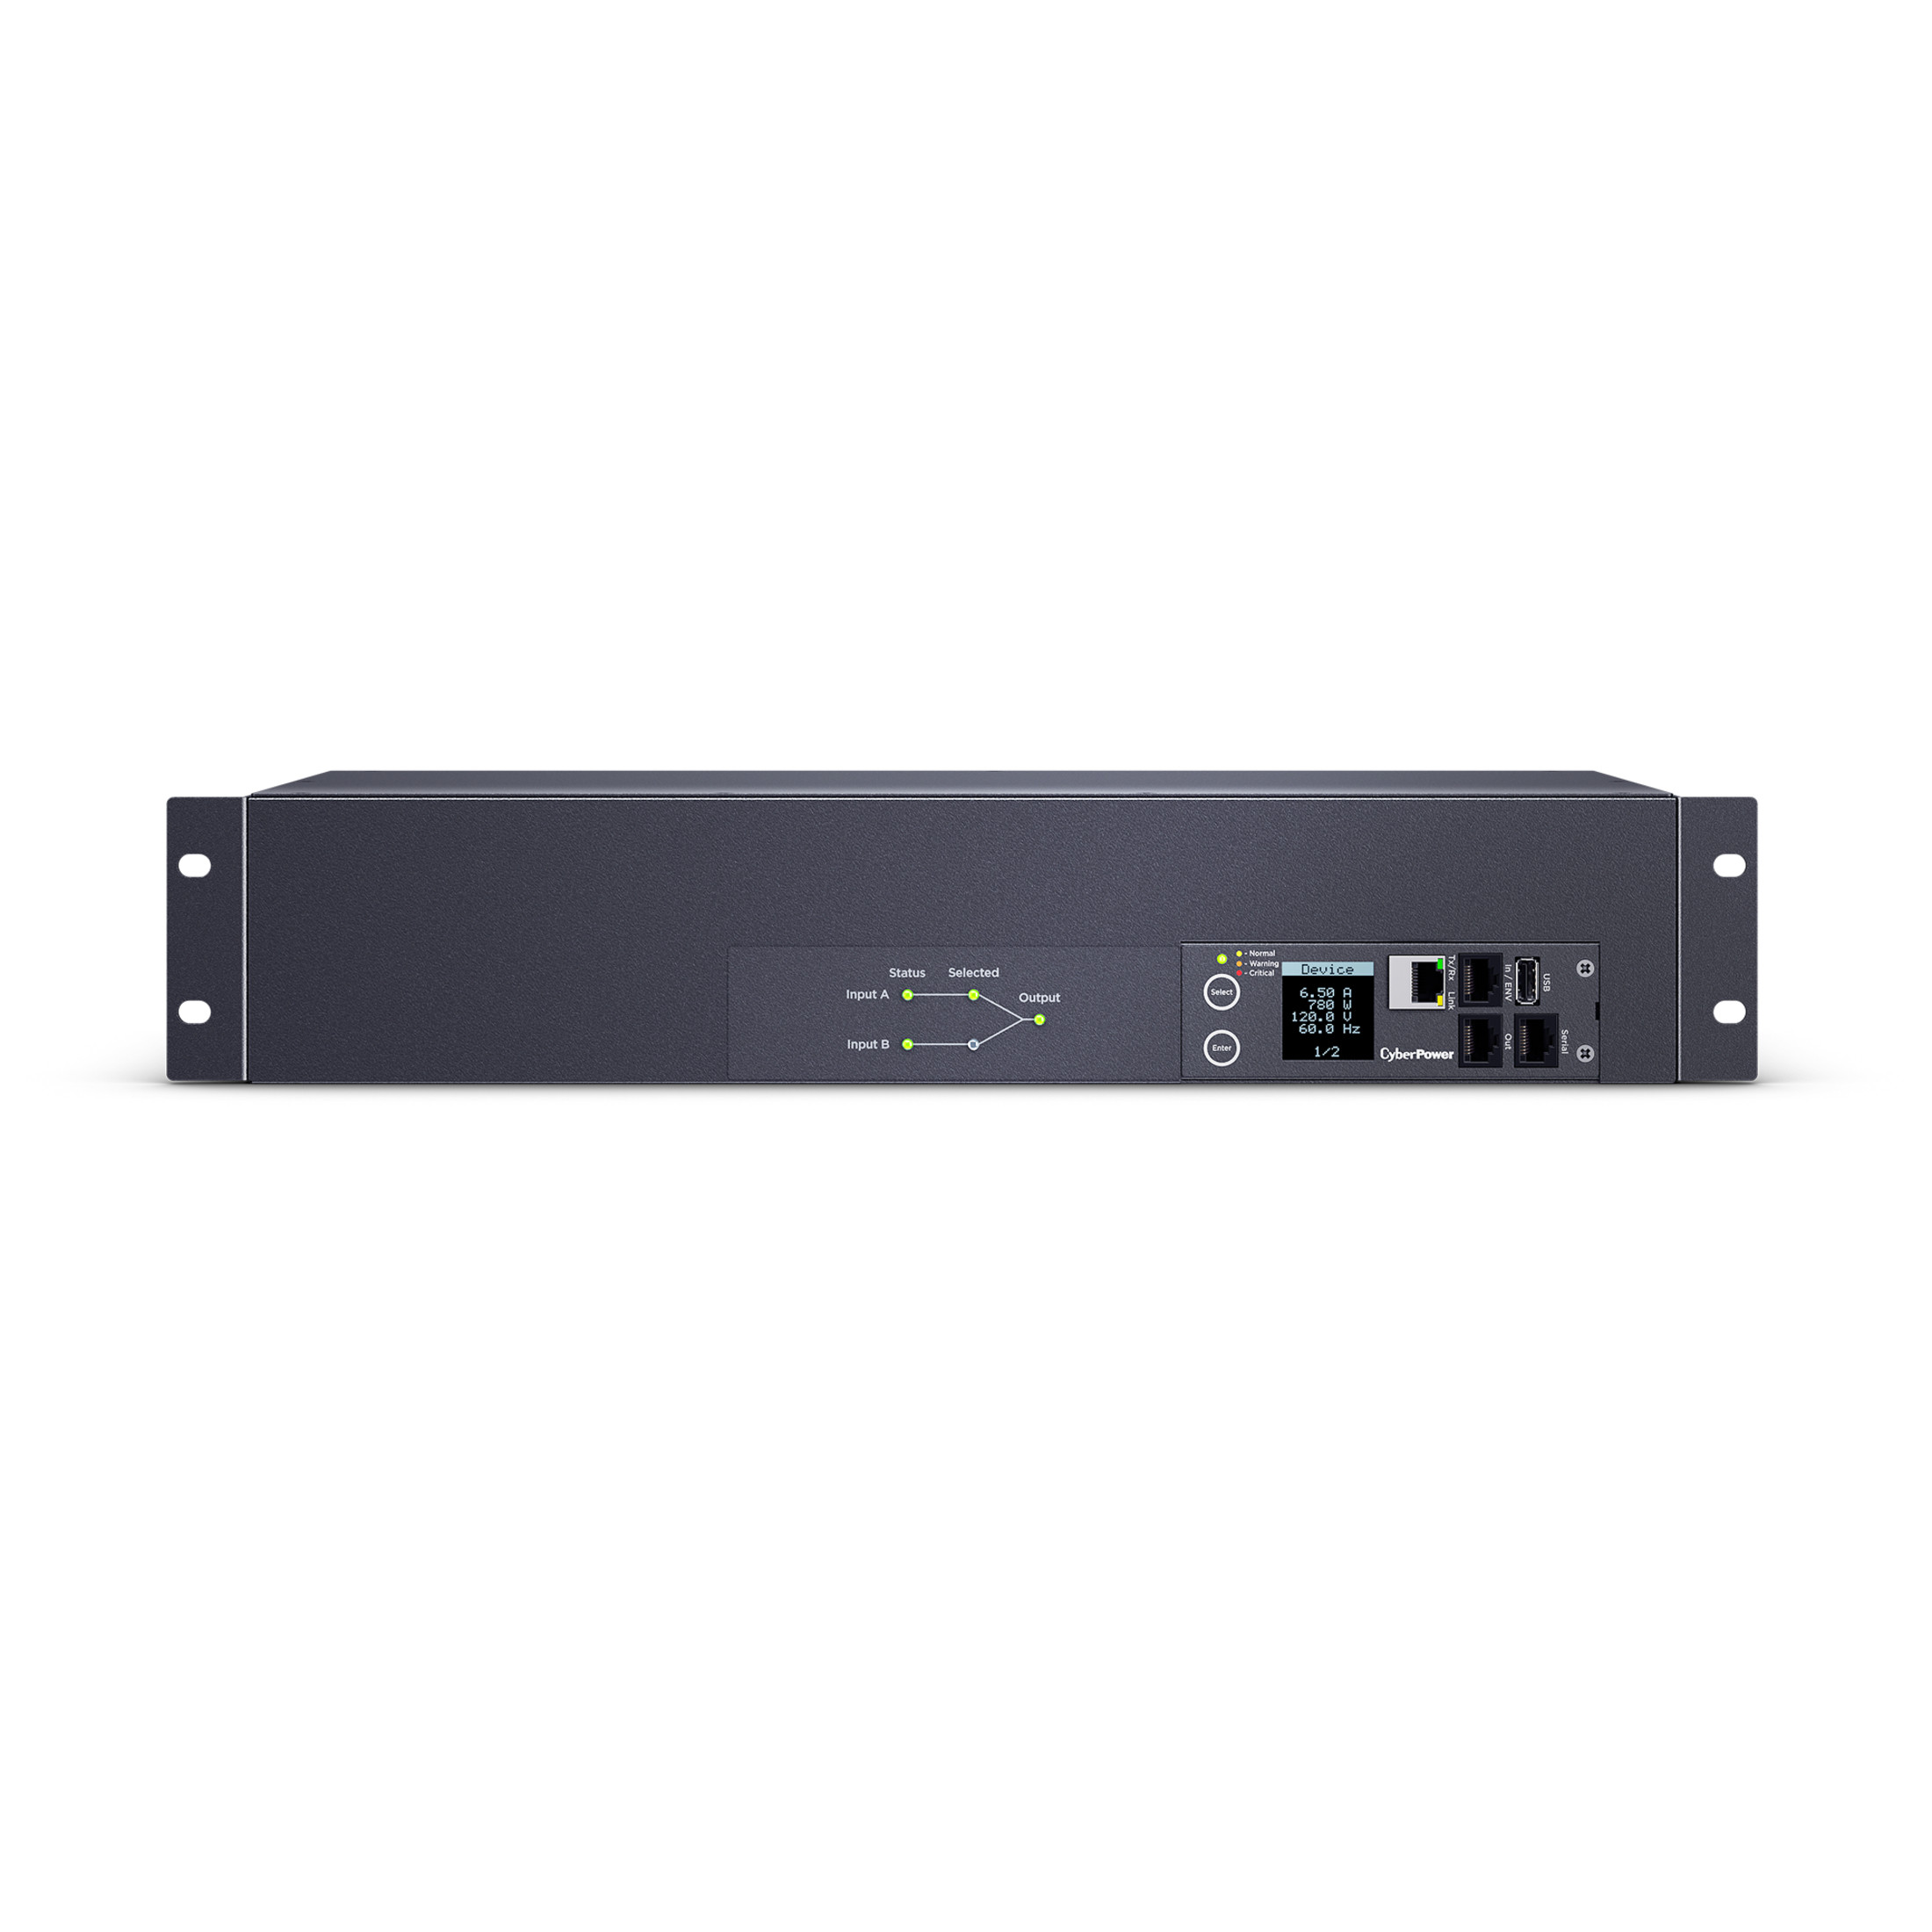 CyberPower PDU44003 Metered ATS PDU – 17-Outlets